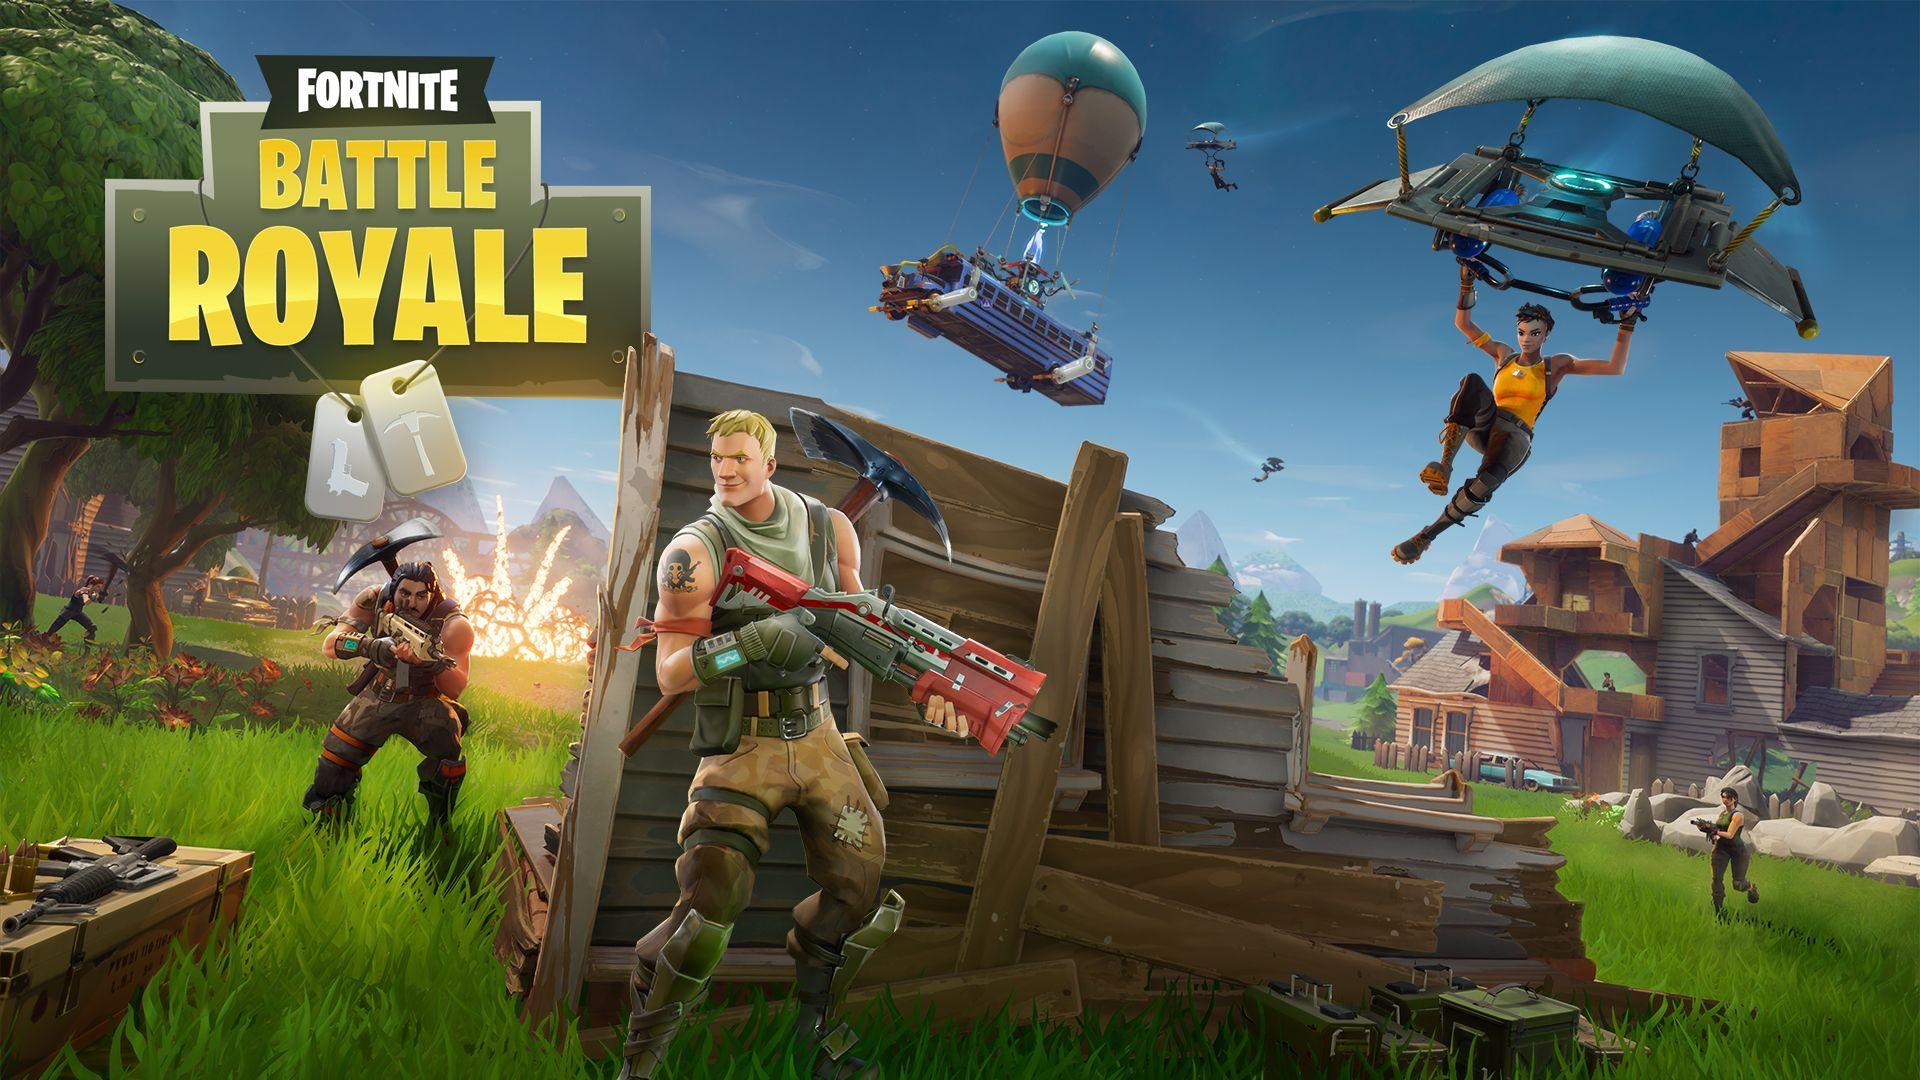 Cool Fortnite Battle Royale Wallpapers Top Free Cool Fortnite